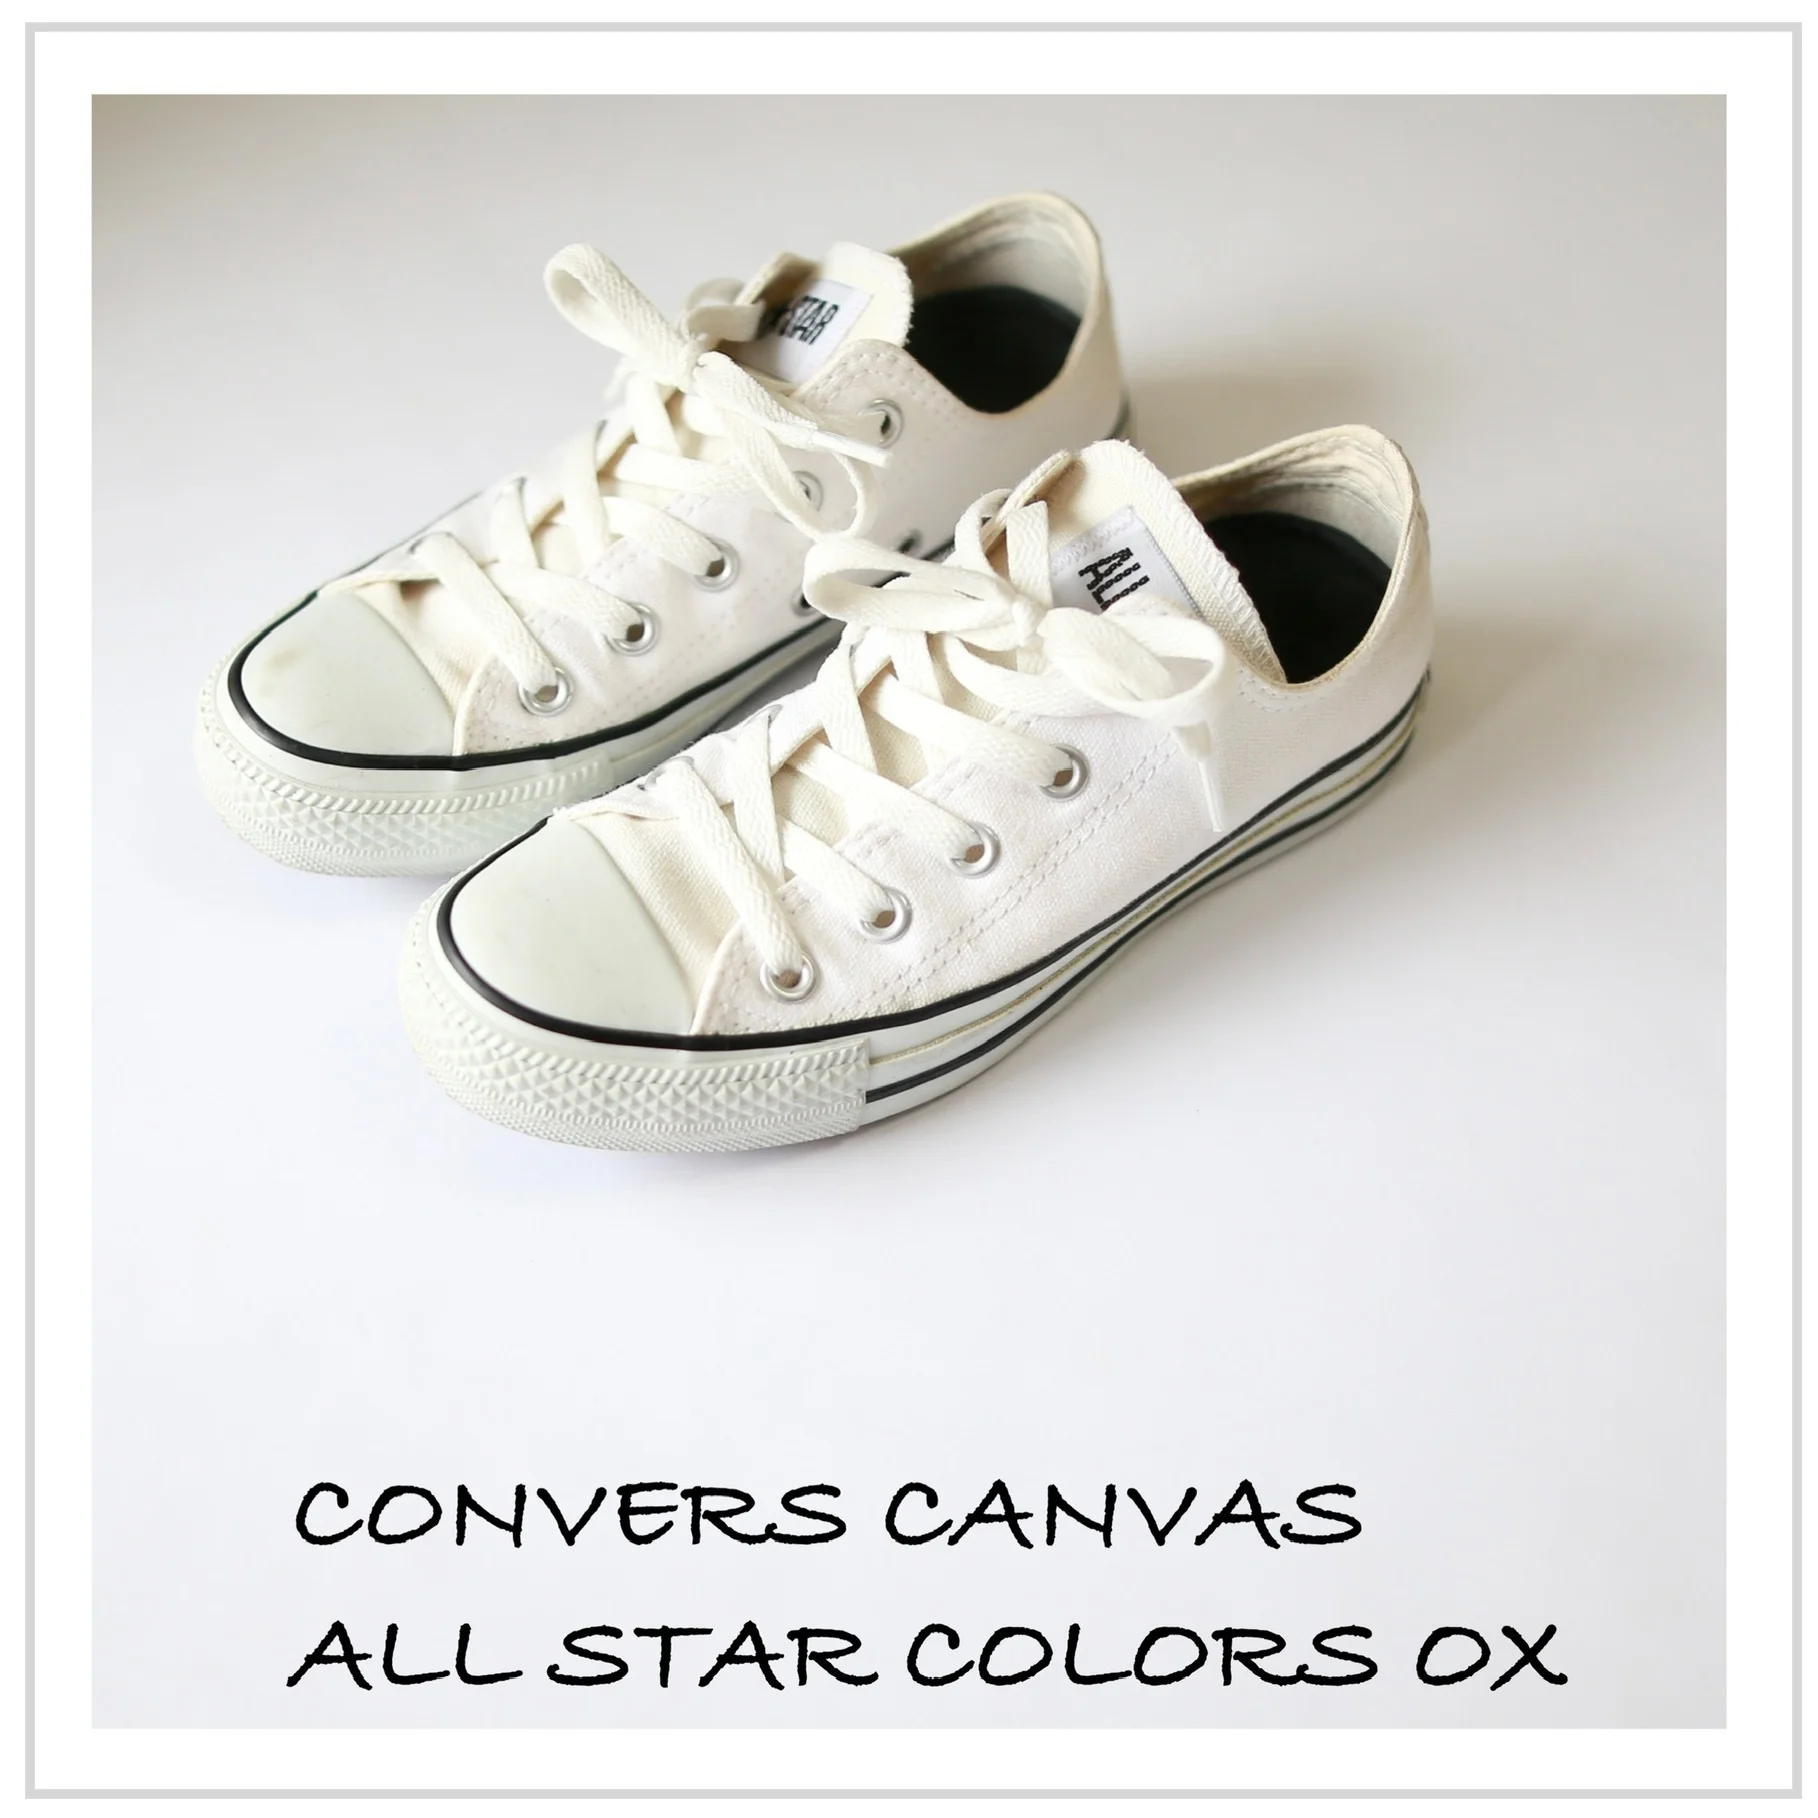 CONVERS CANVAS ALL STAR COLORS OX